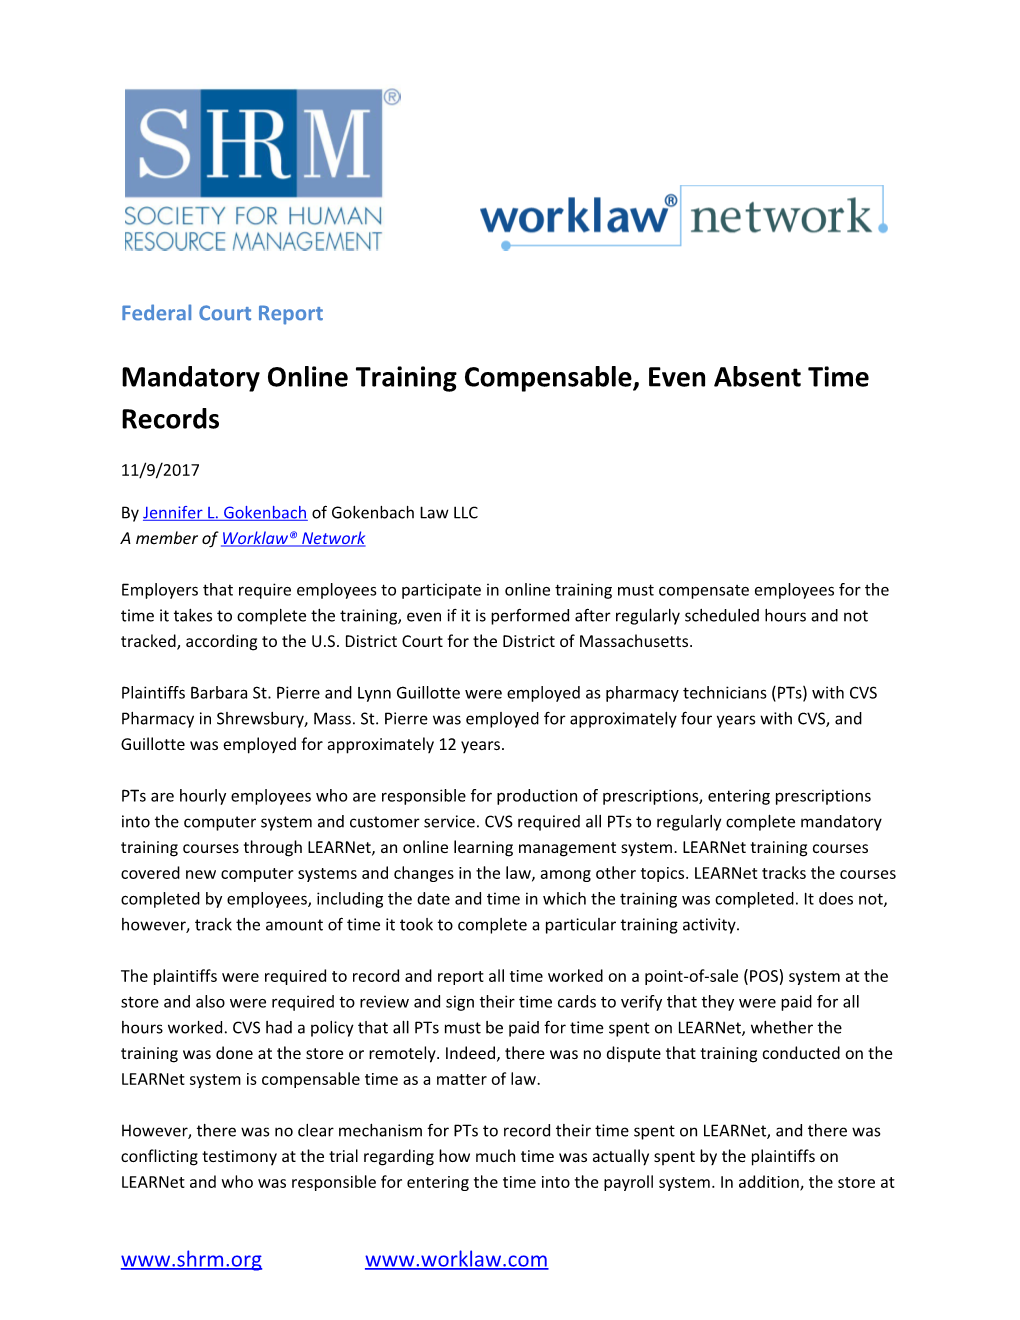 Federal Court Report Mandatory Online Training Compensable, Even Absent Time Records